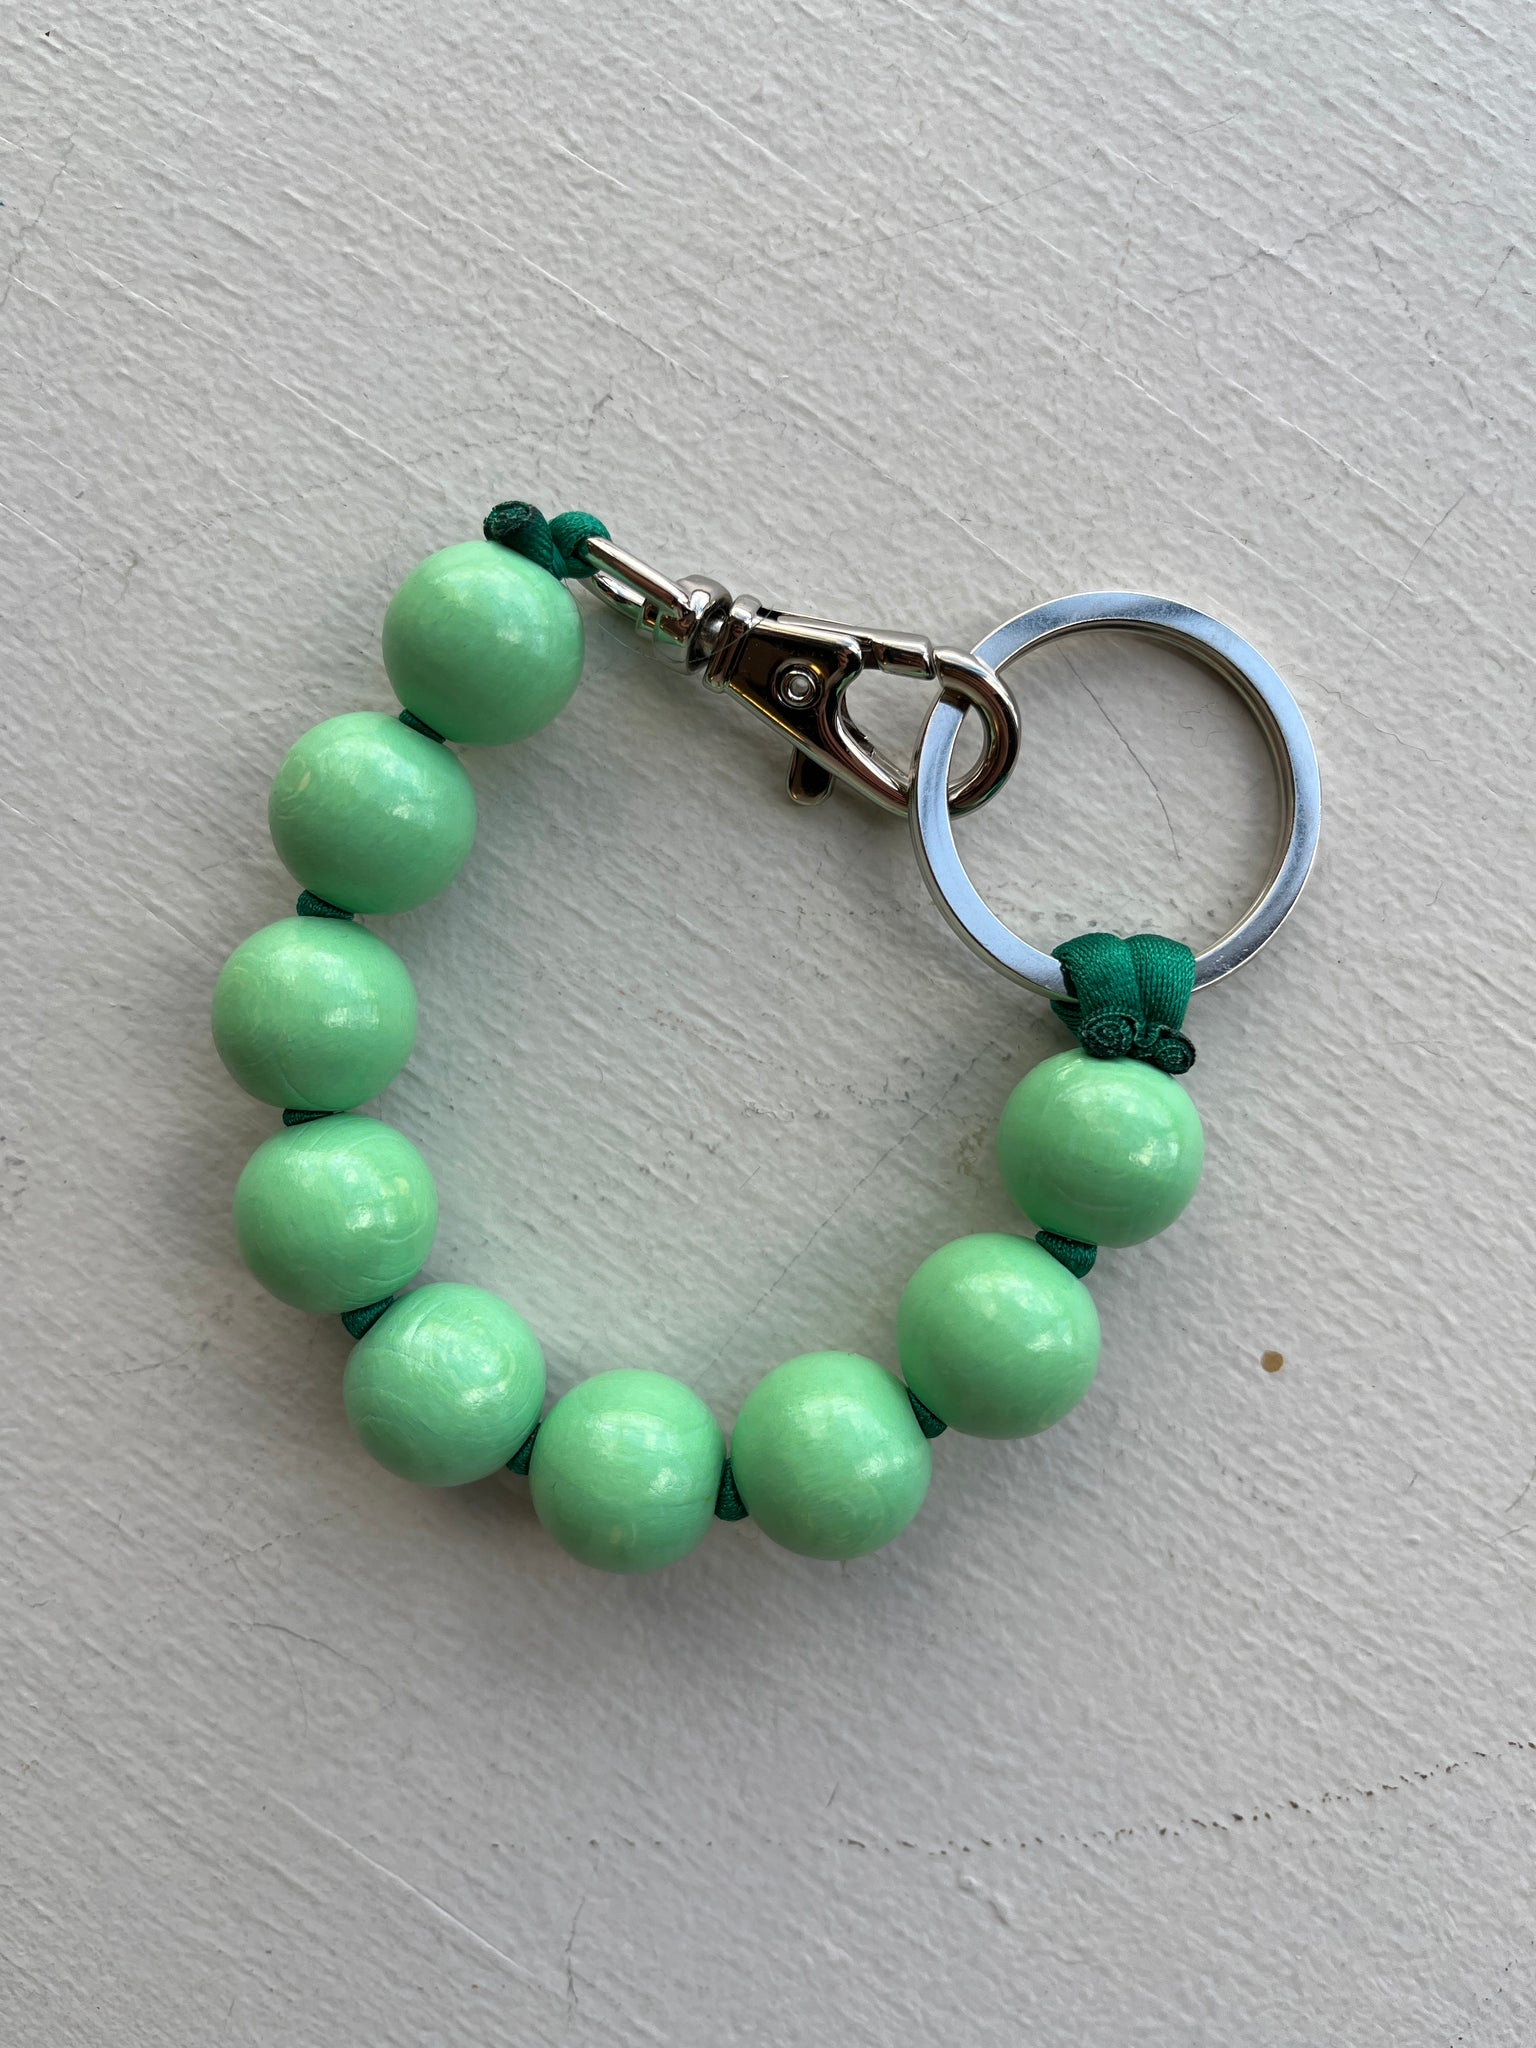 Plant Scouts Keychain - String of Pearls – Green Folk Botany Shop